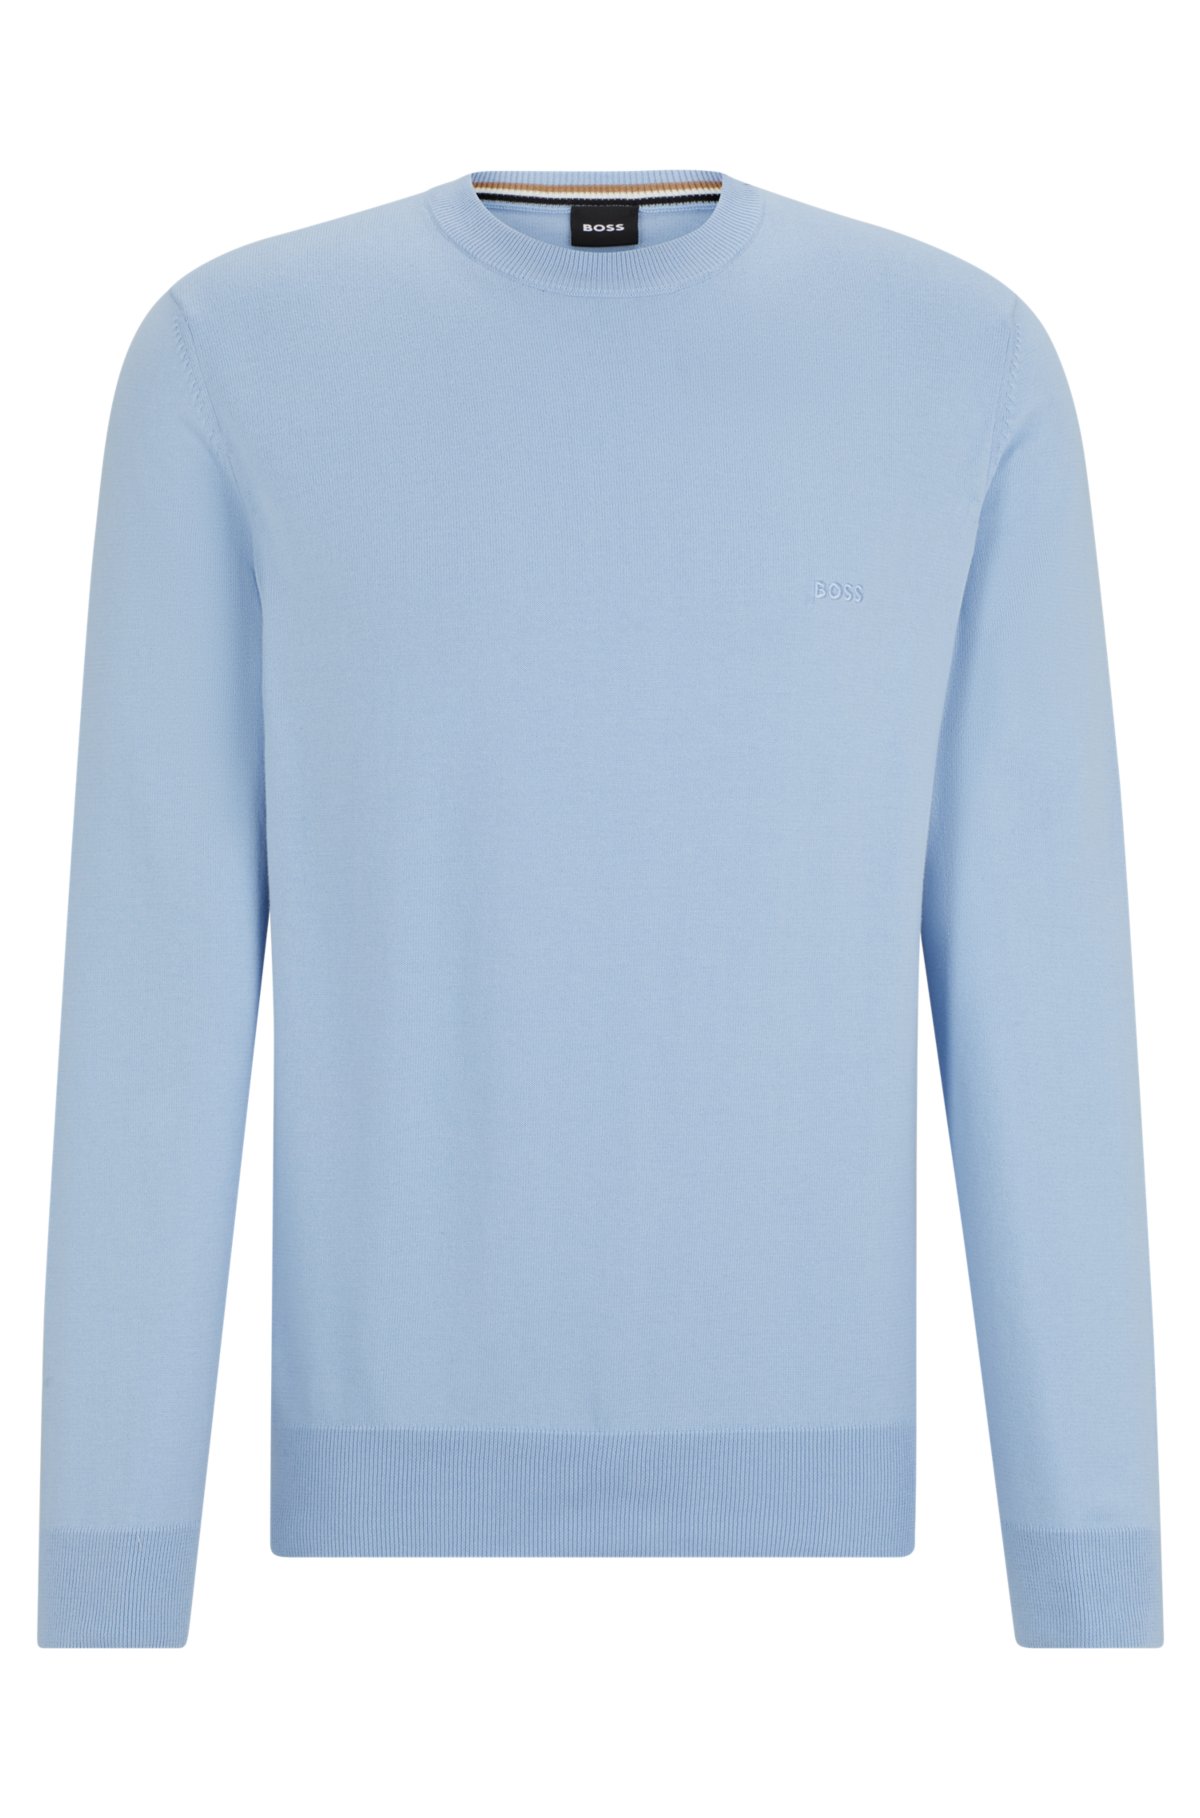 Crew-neck sweater in cotton with embroidered logo, Light Blue